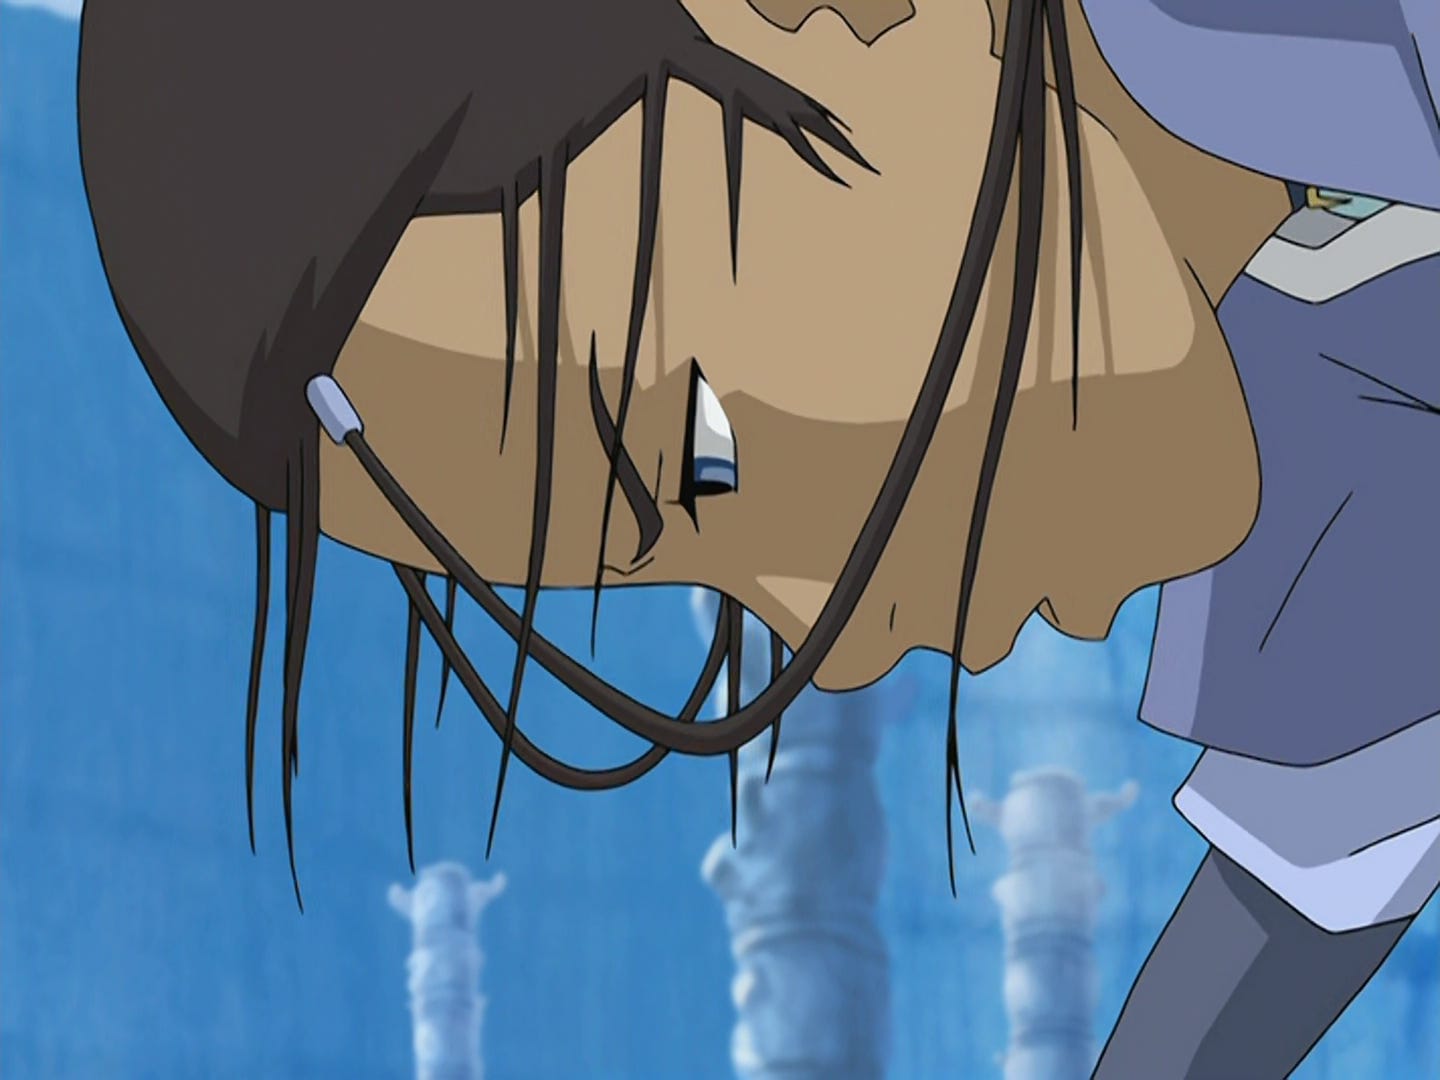 In the North Pole, Katara crouches on the ground, her hair a mess, breathing heavily.